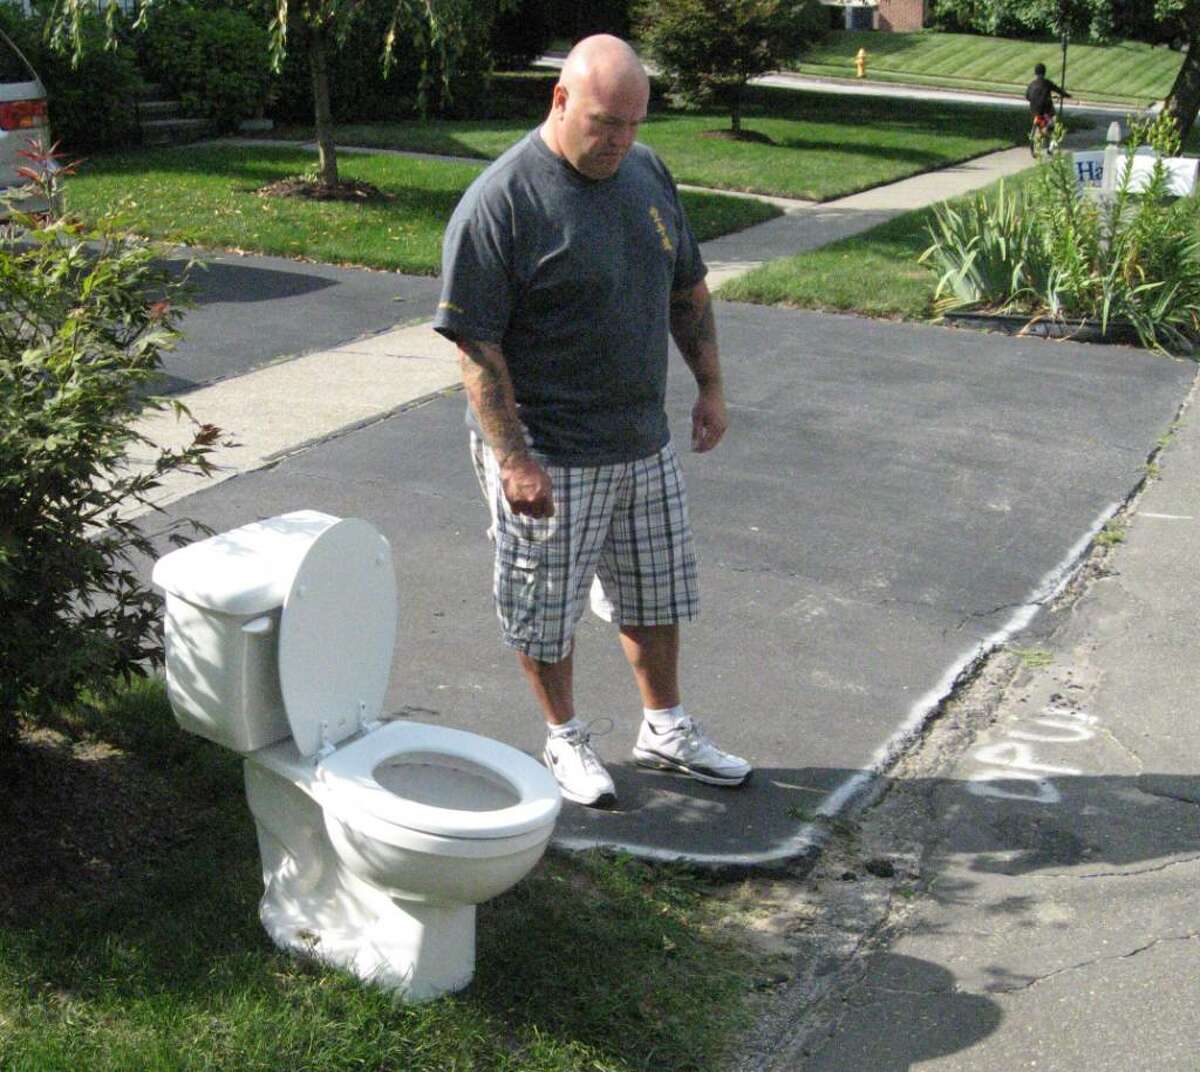 Grant Dalling of 385 Bunnyview Drive, Stratford, looks at snowplow damage to his driveway that the town has yet to repair. The toilet is his message of silent protest to Stratford officials.